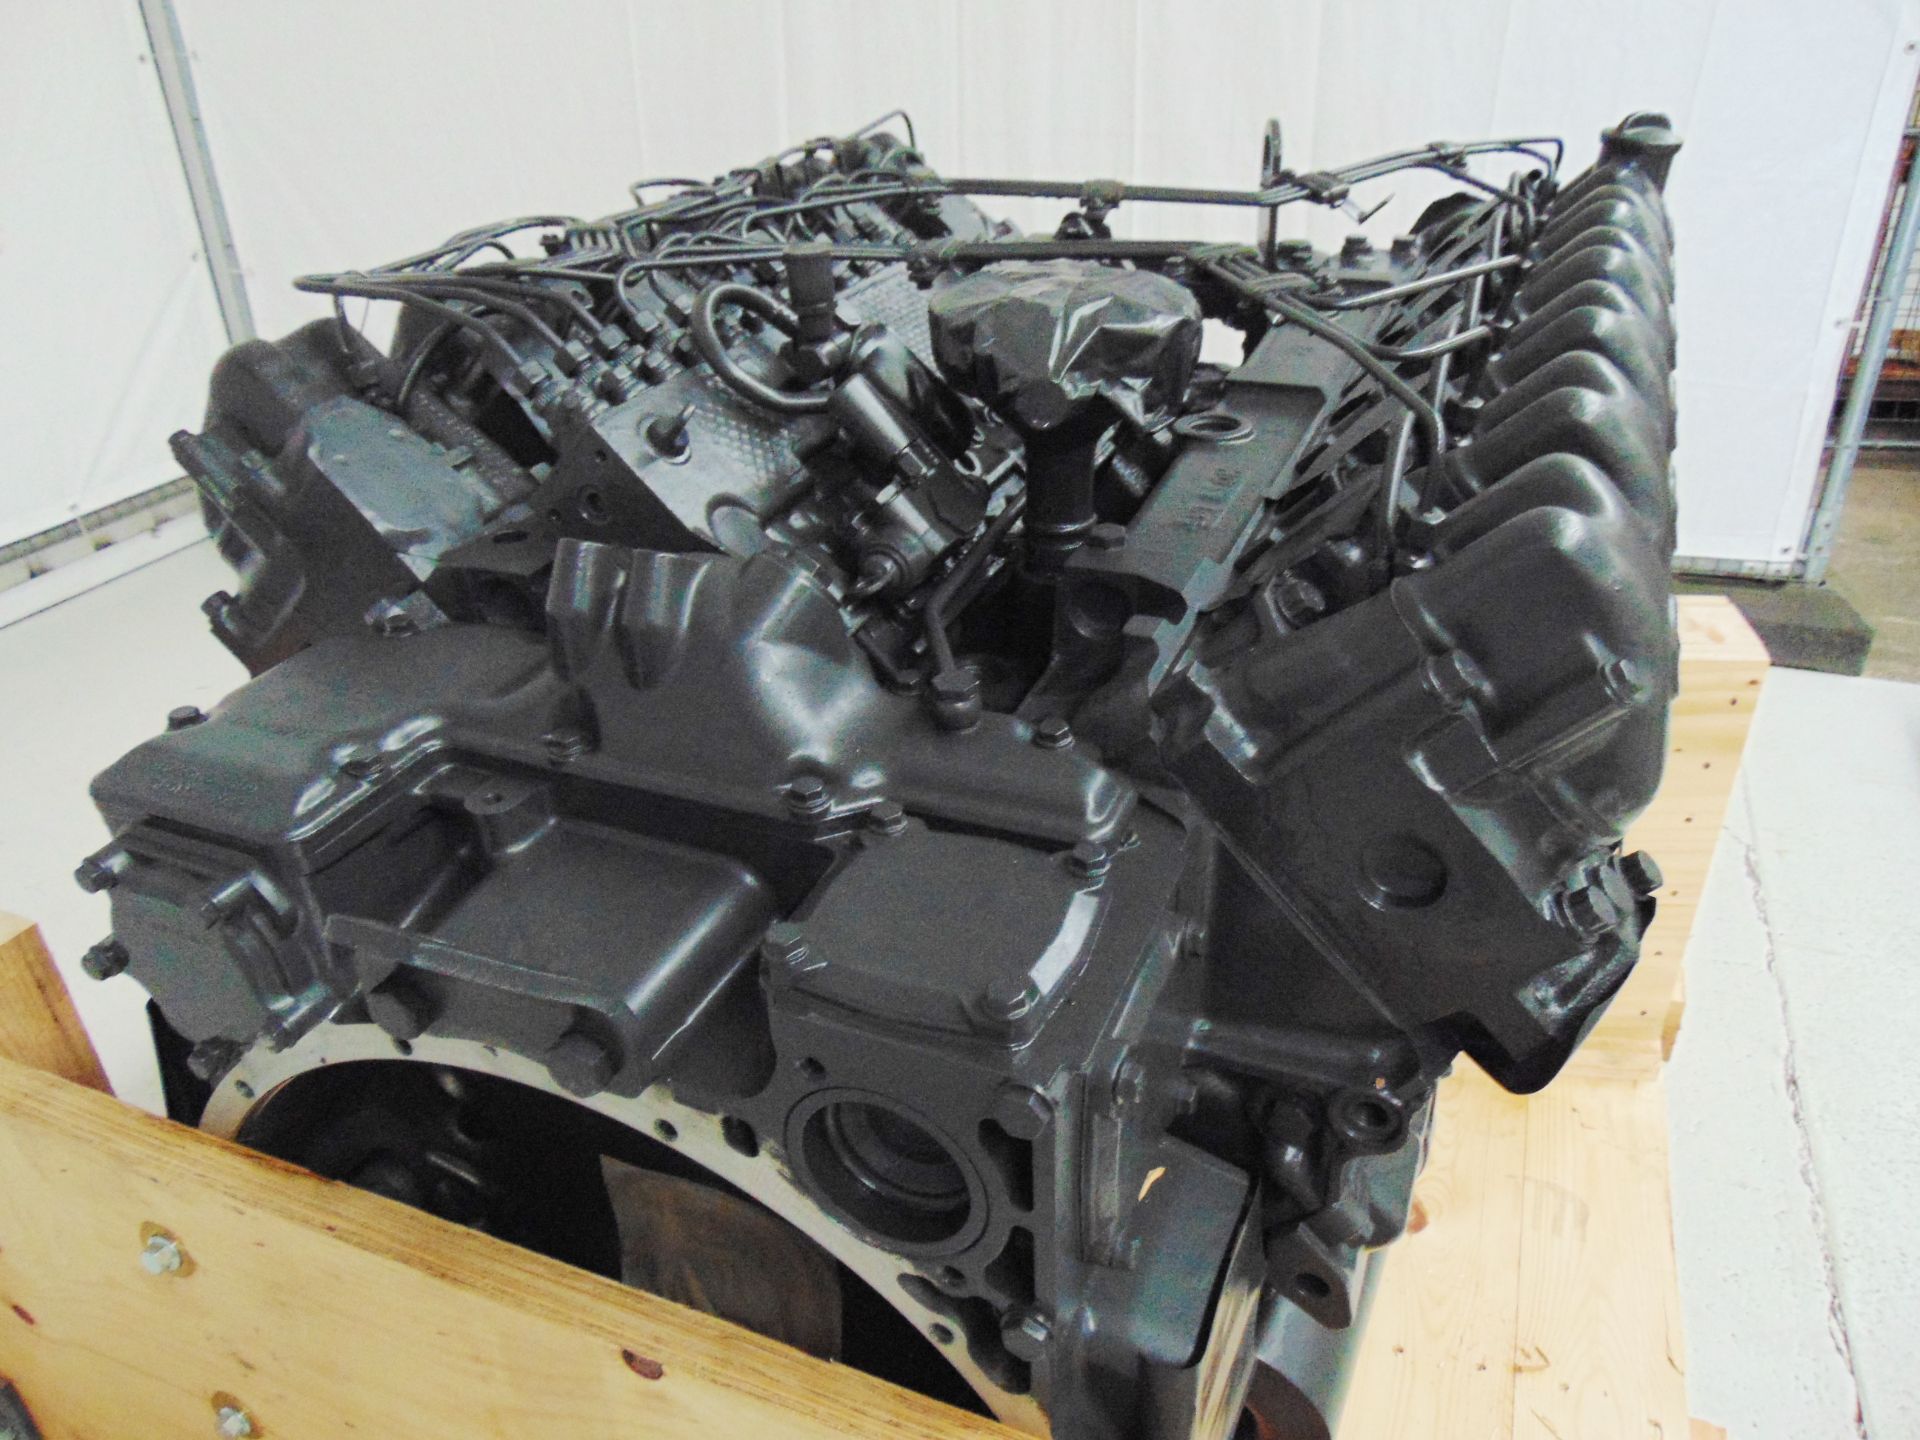 Factory Reconditioned Mercedes-Benz OM424 V12 Turbo Diesel Engine - Image 7 of 34